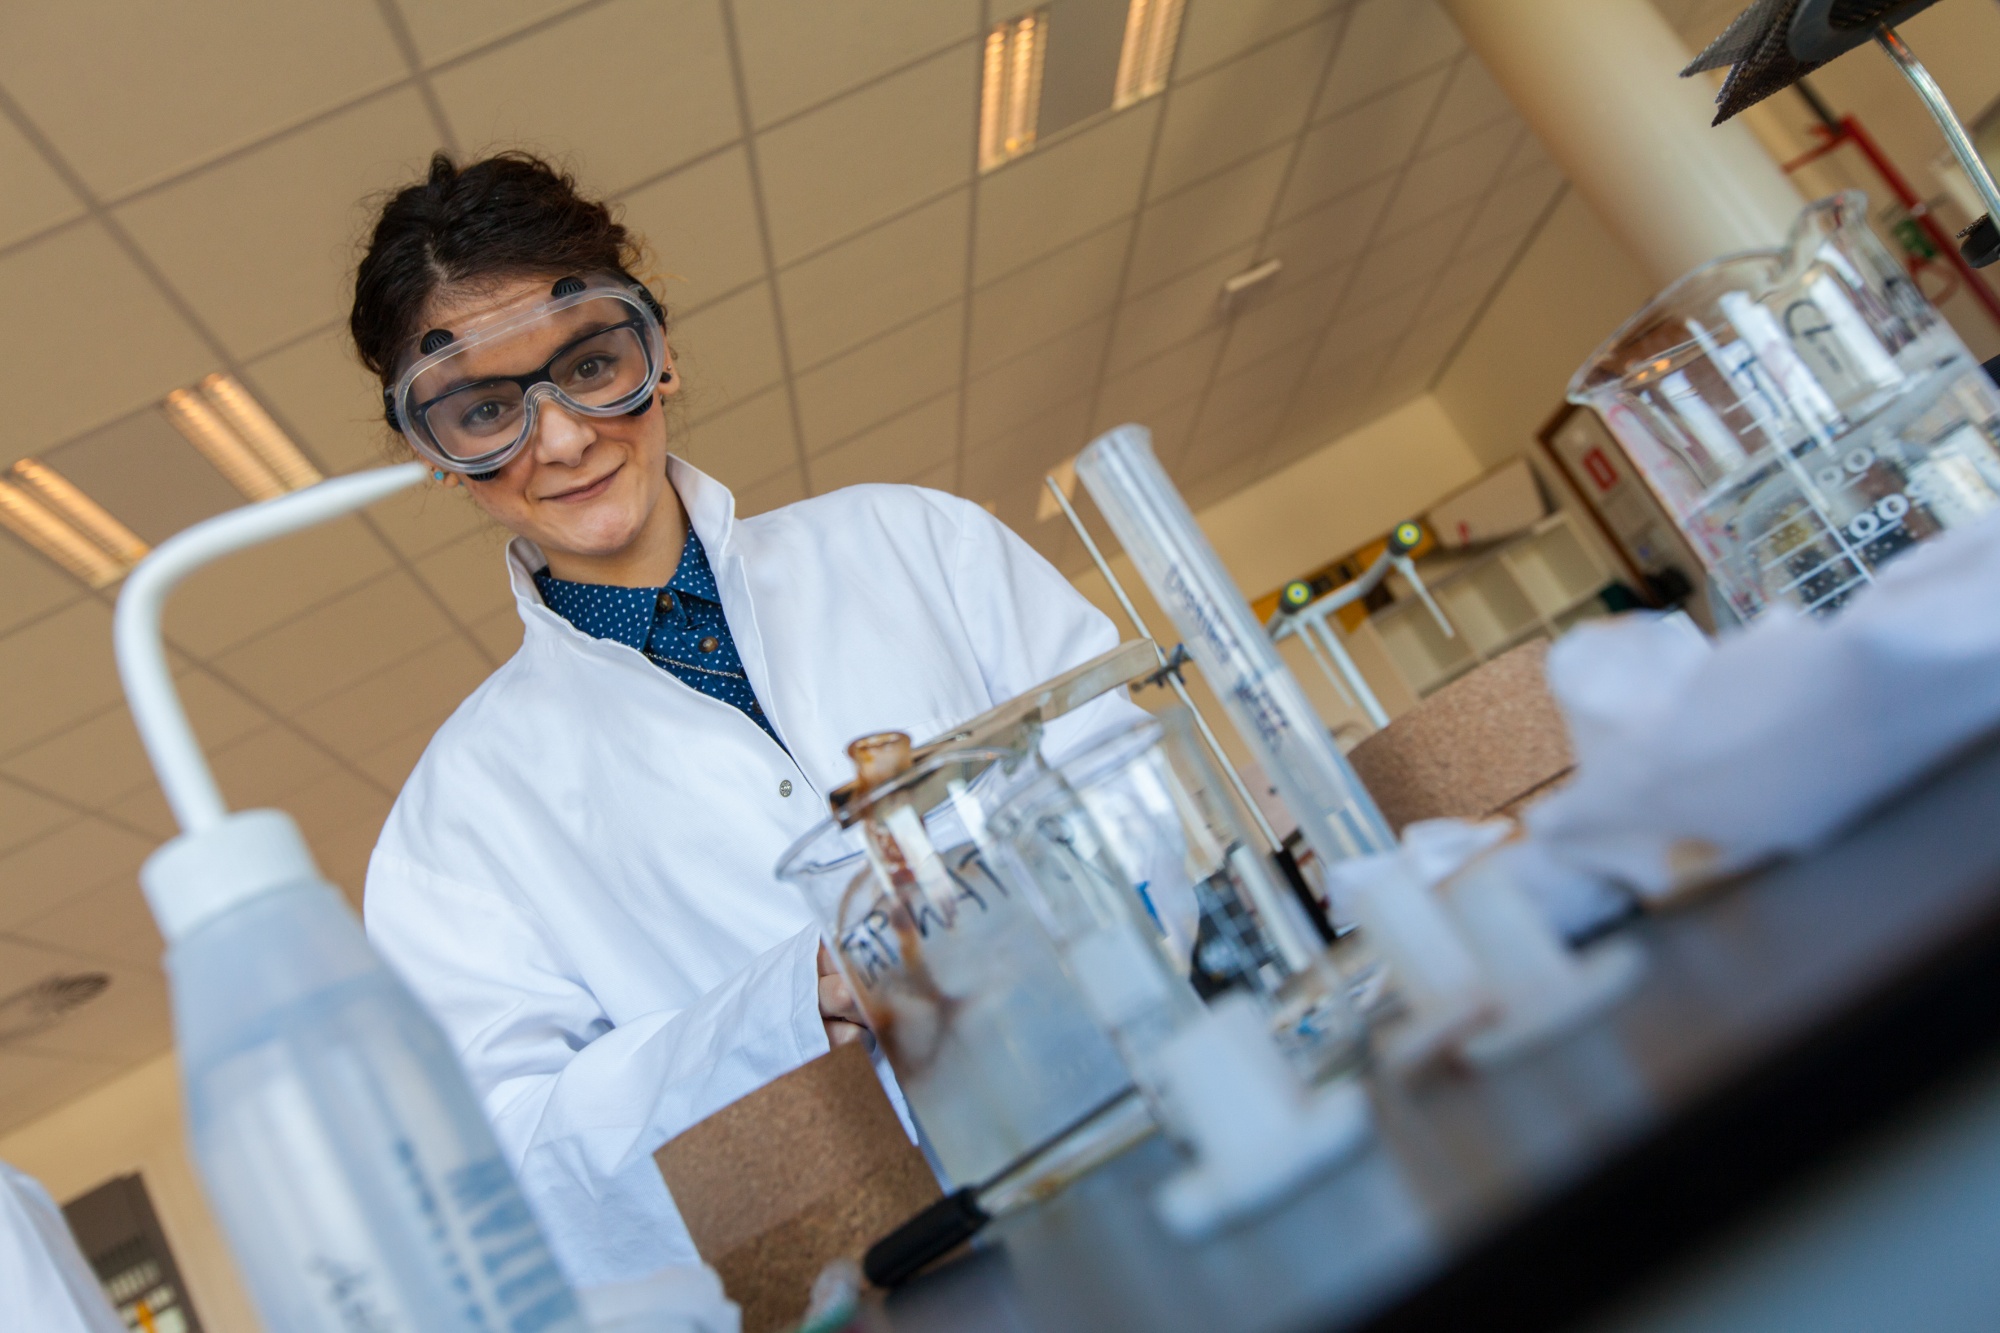 A young female student in lab coat enjoys working on an experiment